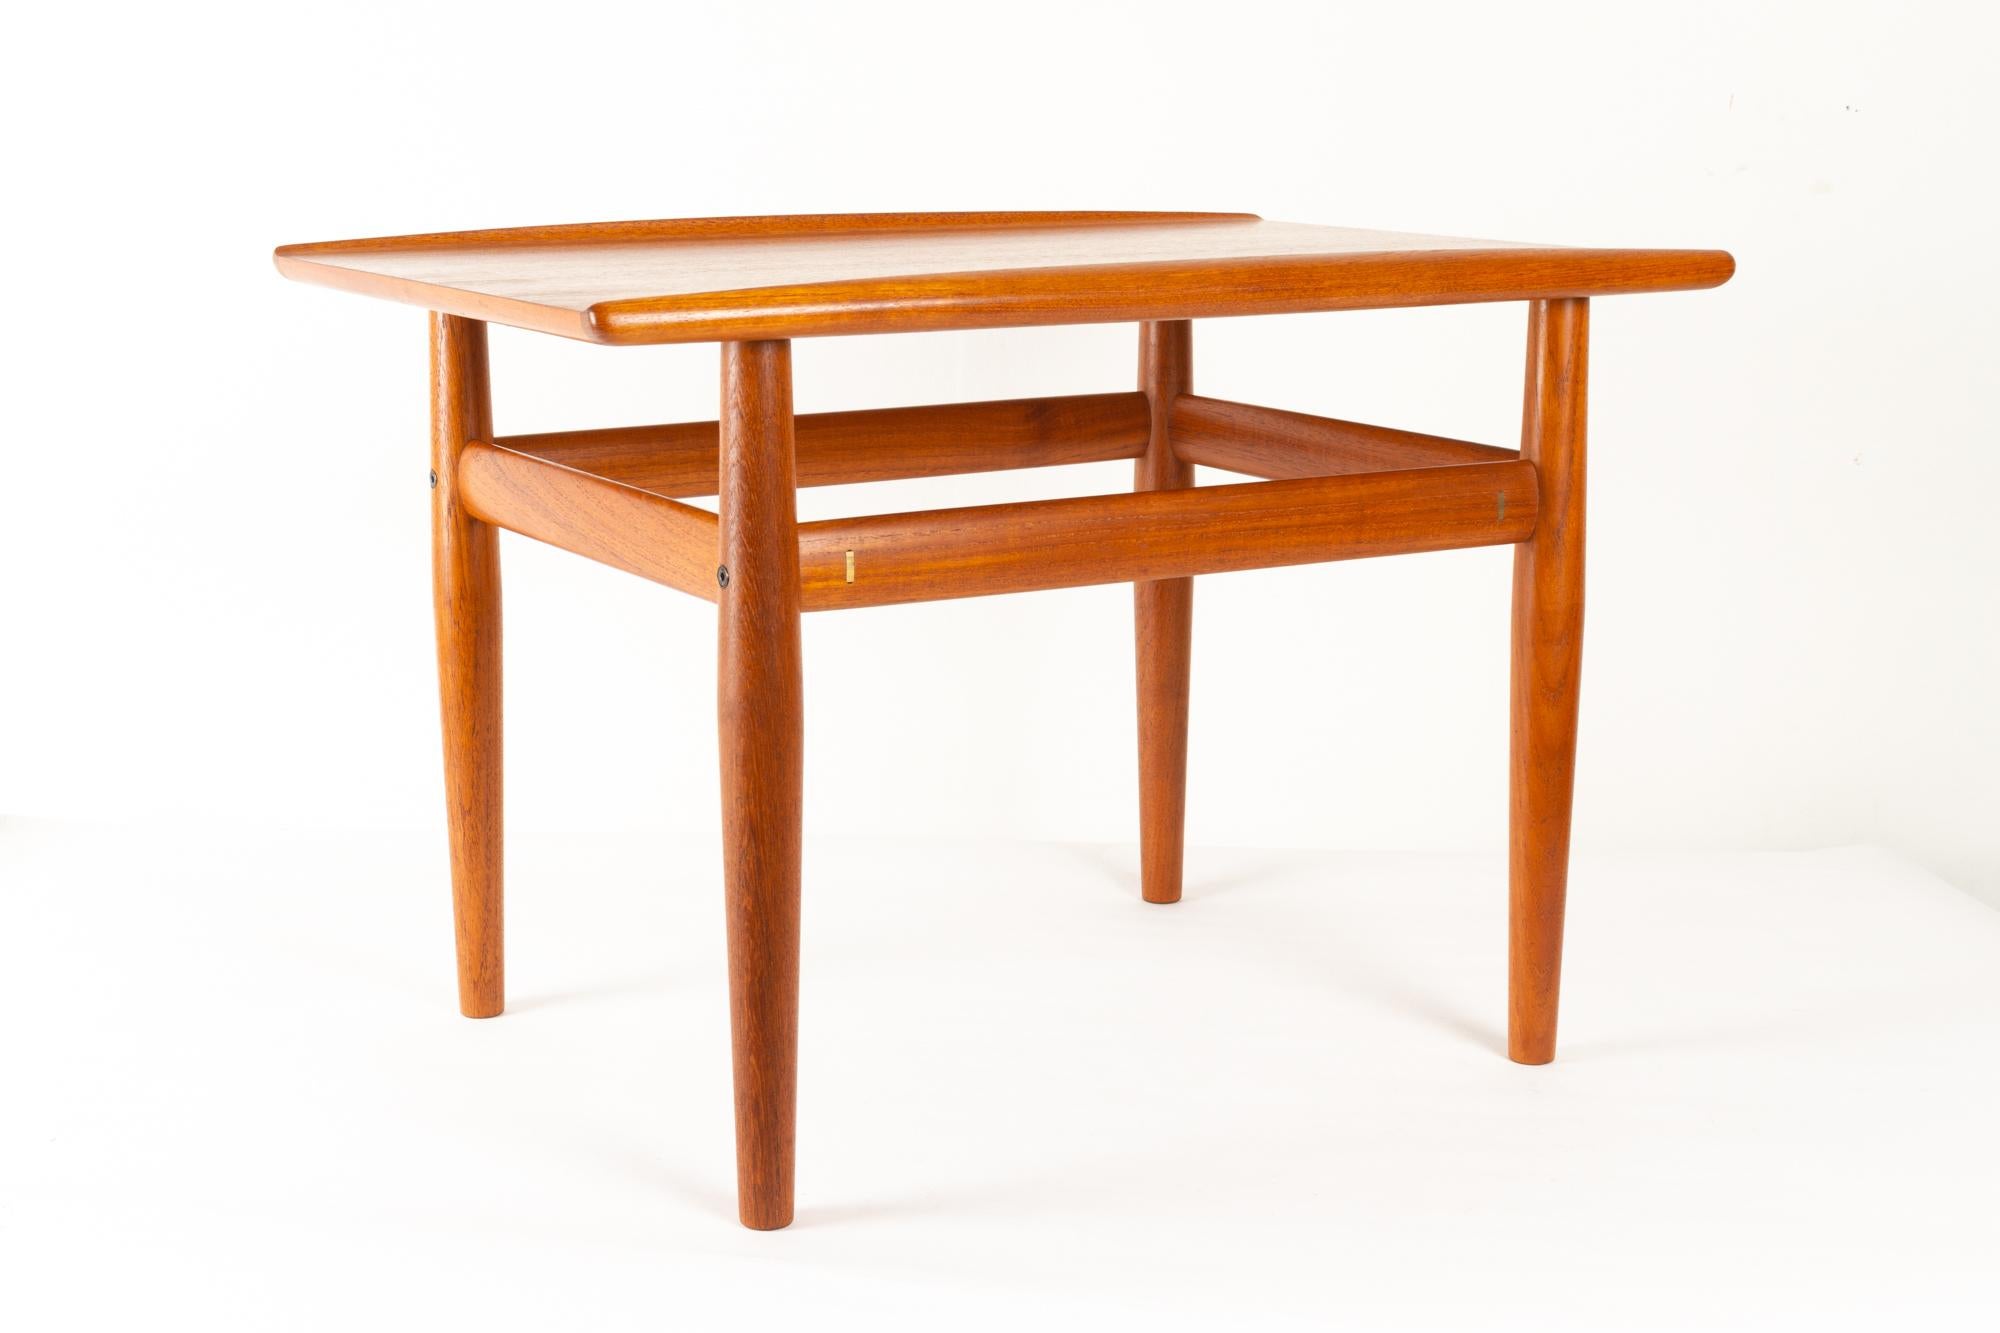 Vintage Danish teak side table by Grete Jalk for Glostrup Møbelfabrik, 1960s
Danish modern small coffee table with round tapered legs and frame in solid teak. Tabletop in teak veneer with raised edges also in solid teak. 
Elegant and decorative